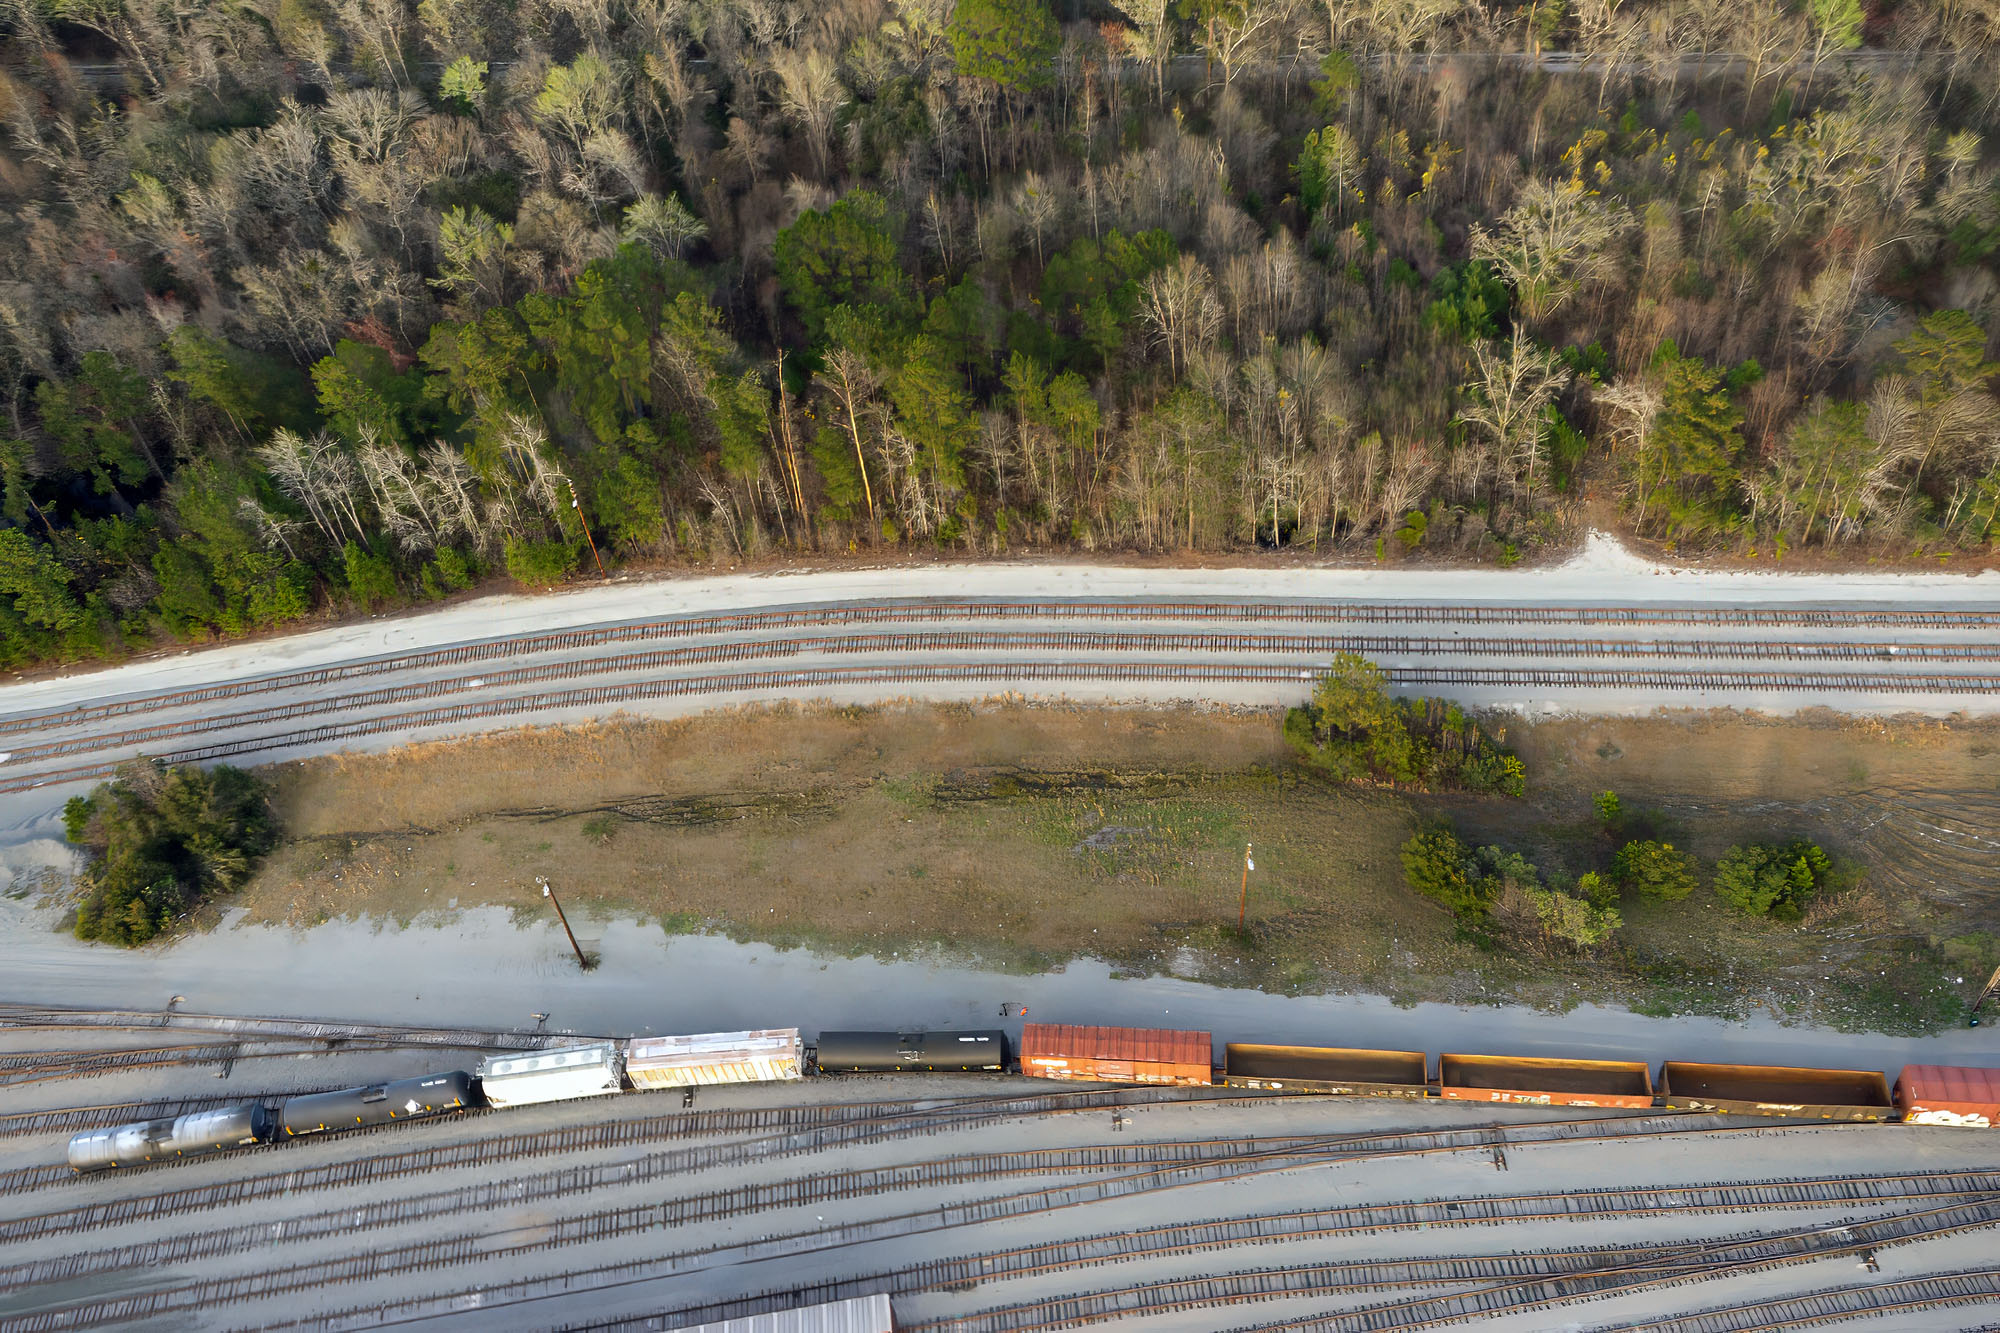 Train tracks from above in Savannah